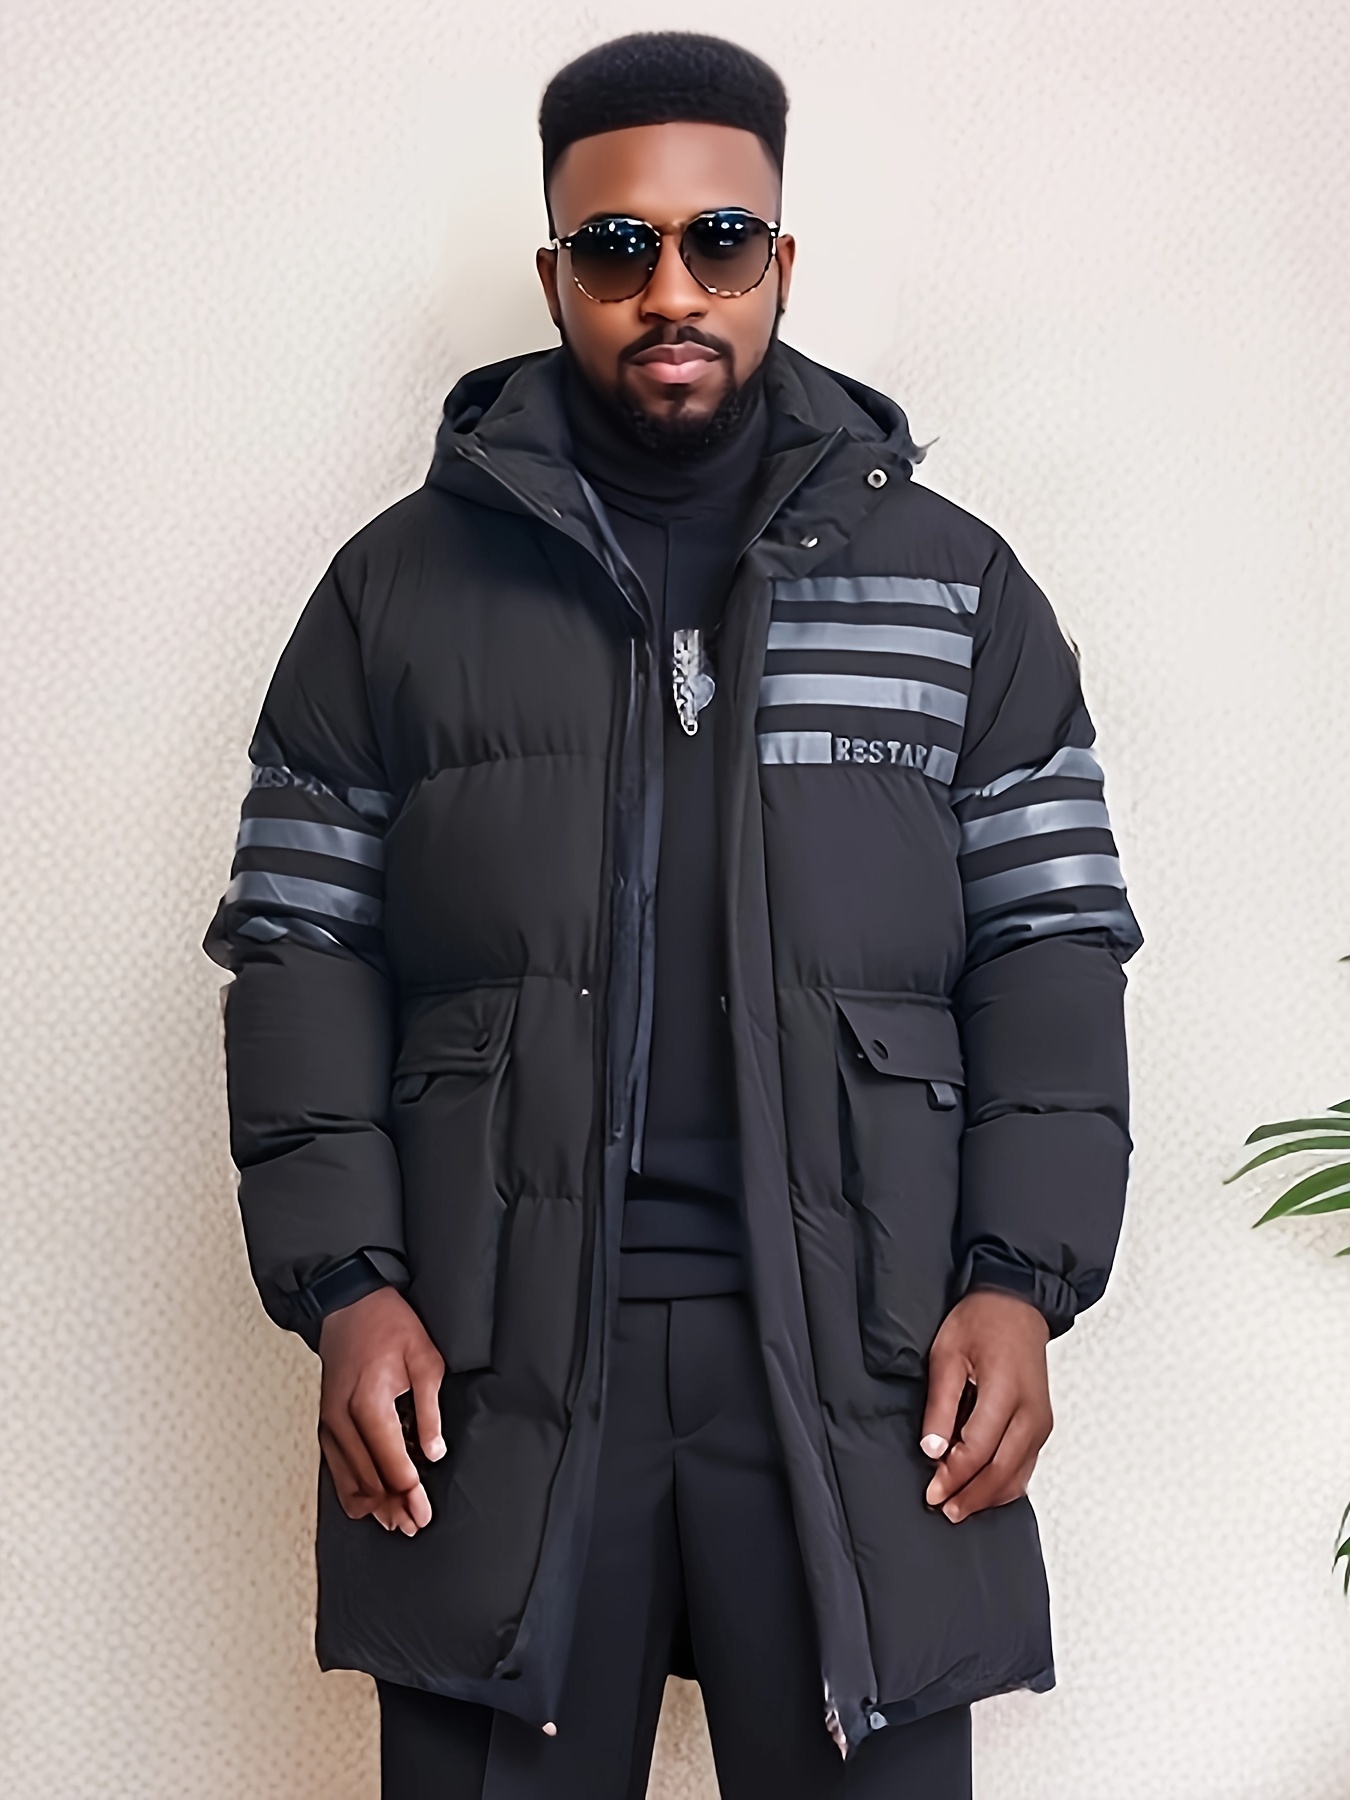 Plus Size Men's Letters Print Hooded Puffer Jacket Thick Heavy Coat, Fall  Winter, Men's Clothing